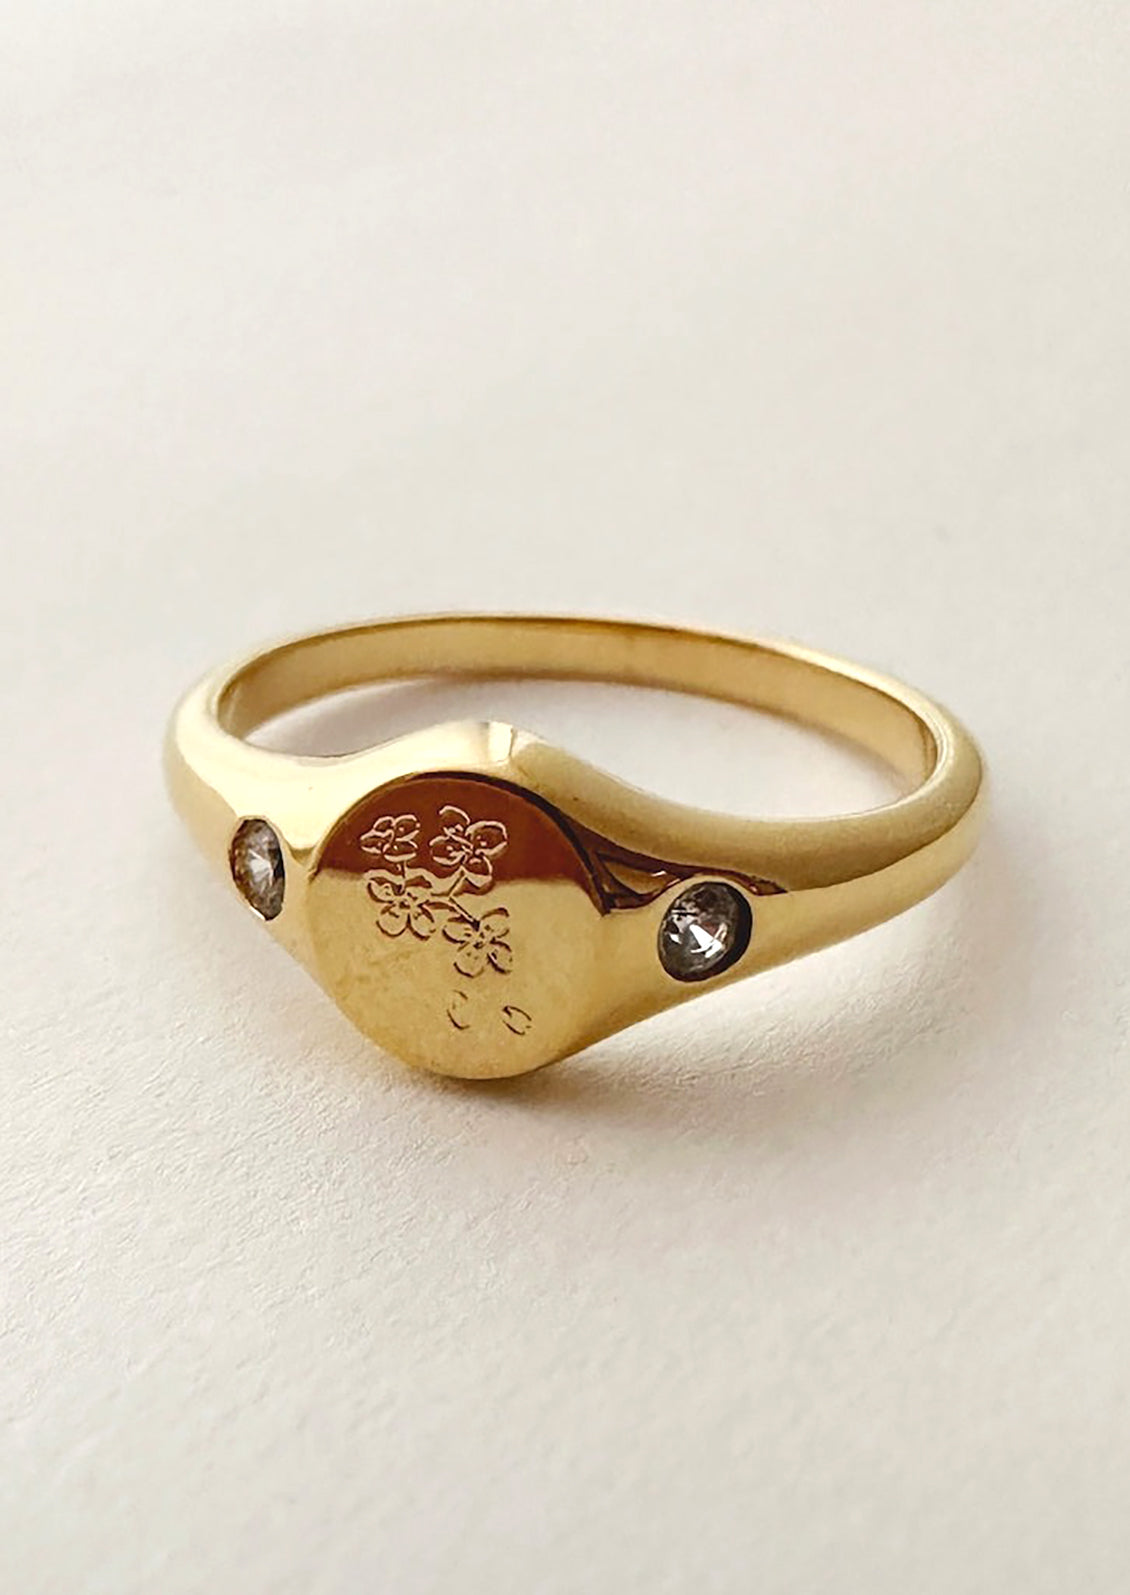 A gold signet ring with floral engraving with clear crystal on either side.